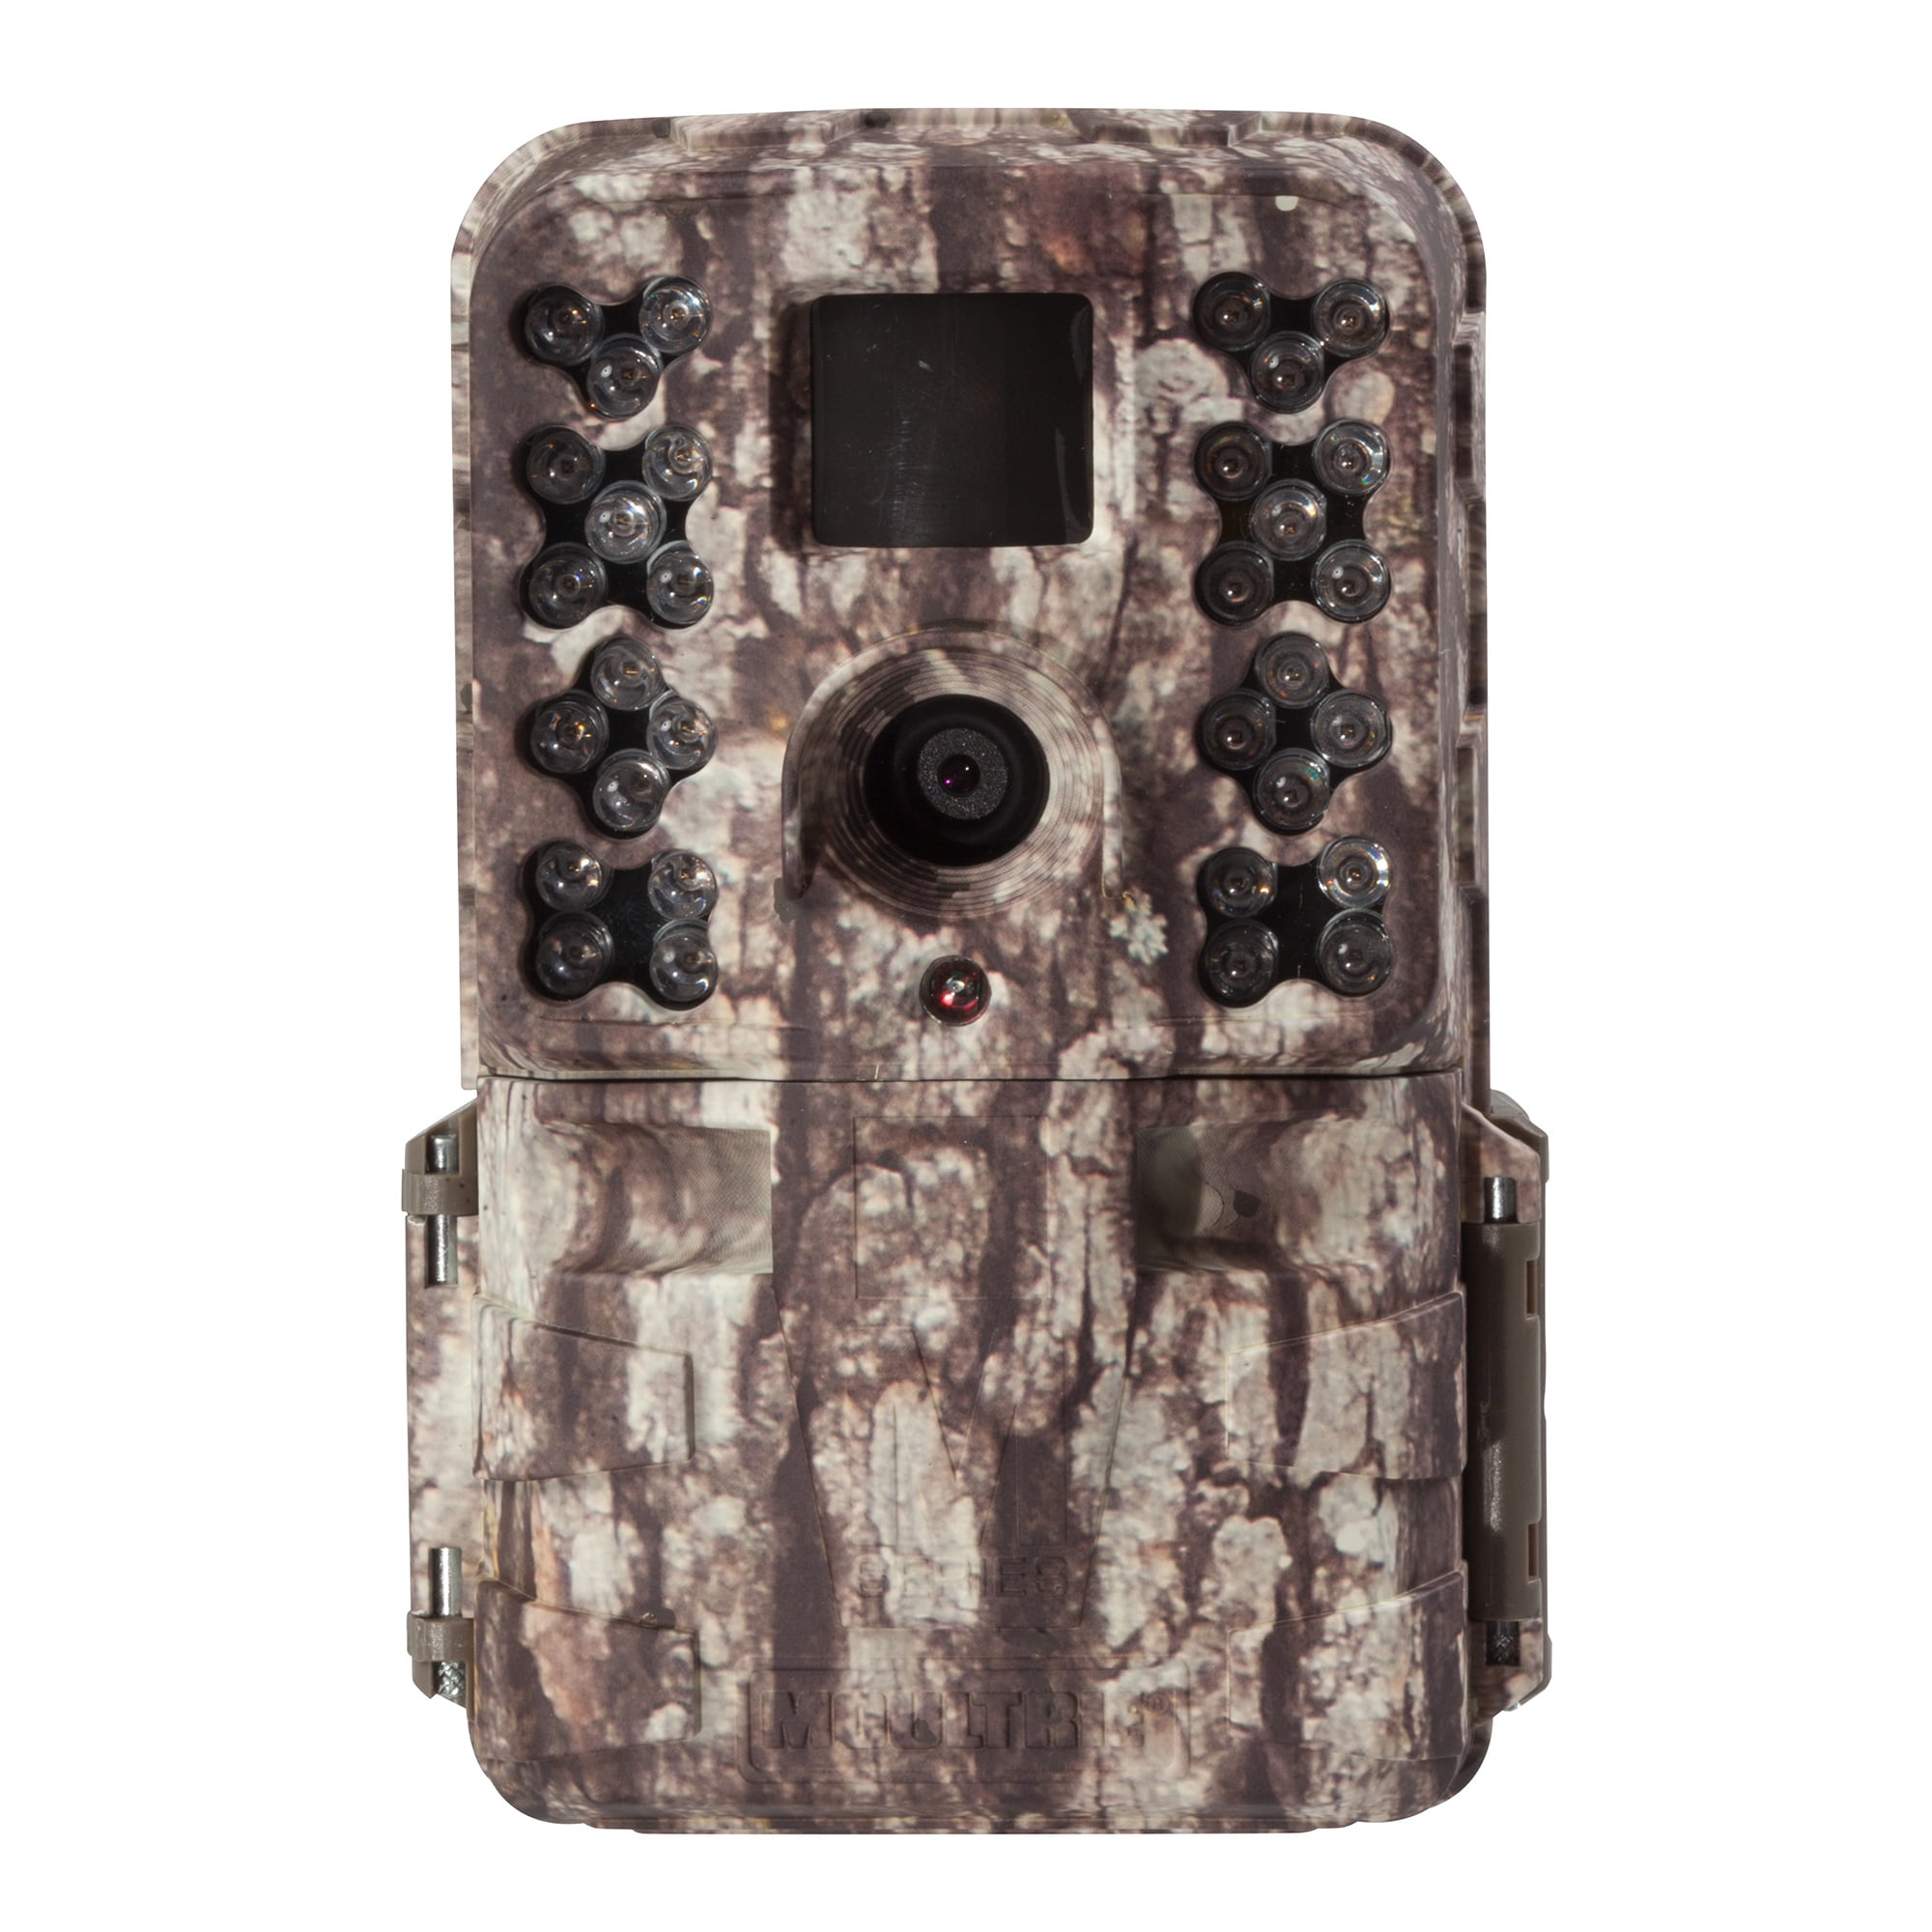 New Moultrie W-40i Game Camera M Series 18 MP 0.3 S Trigger Speed 1080 Video 